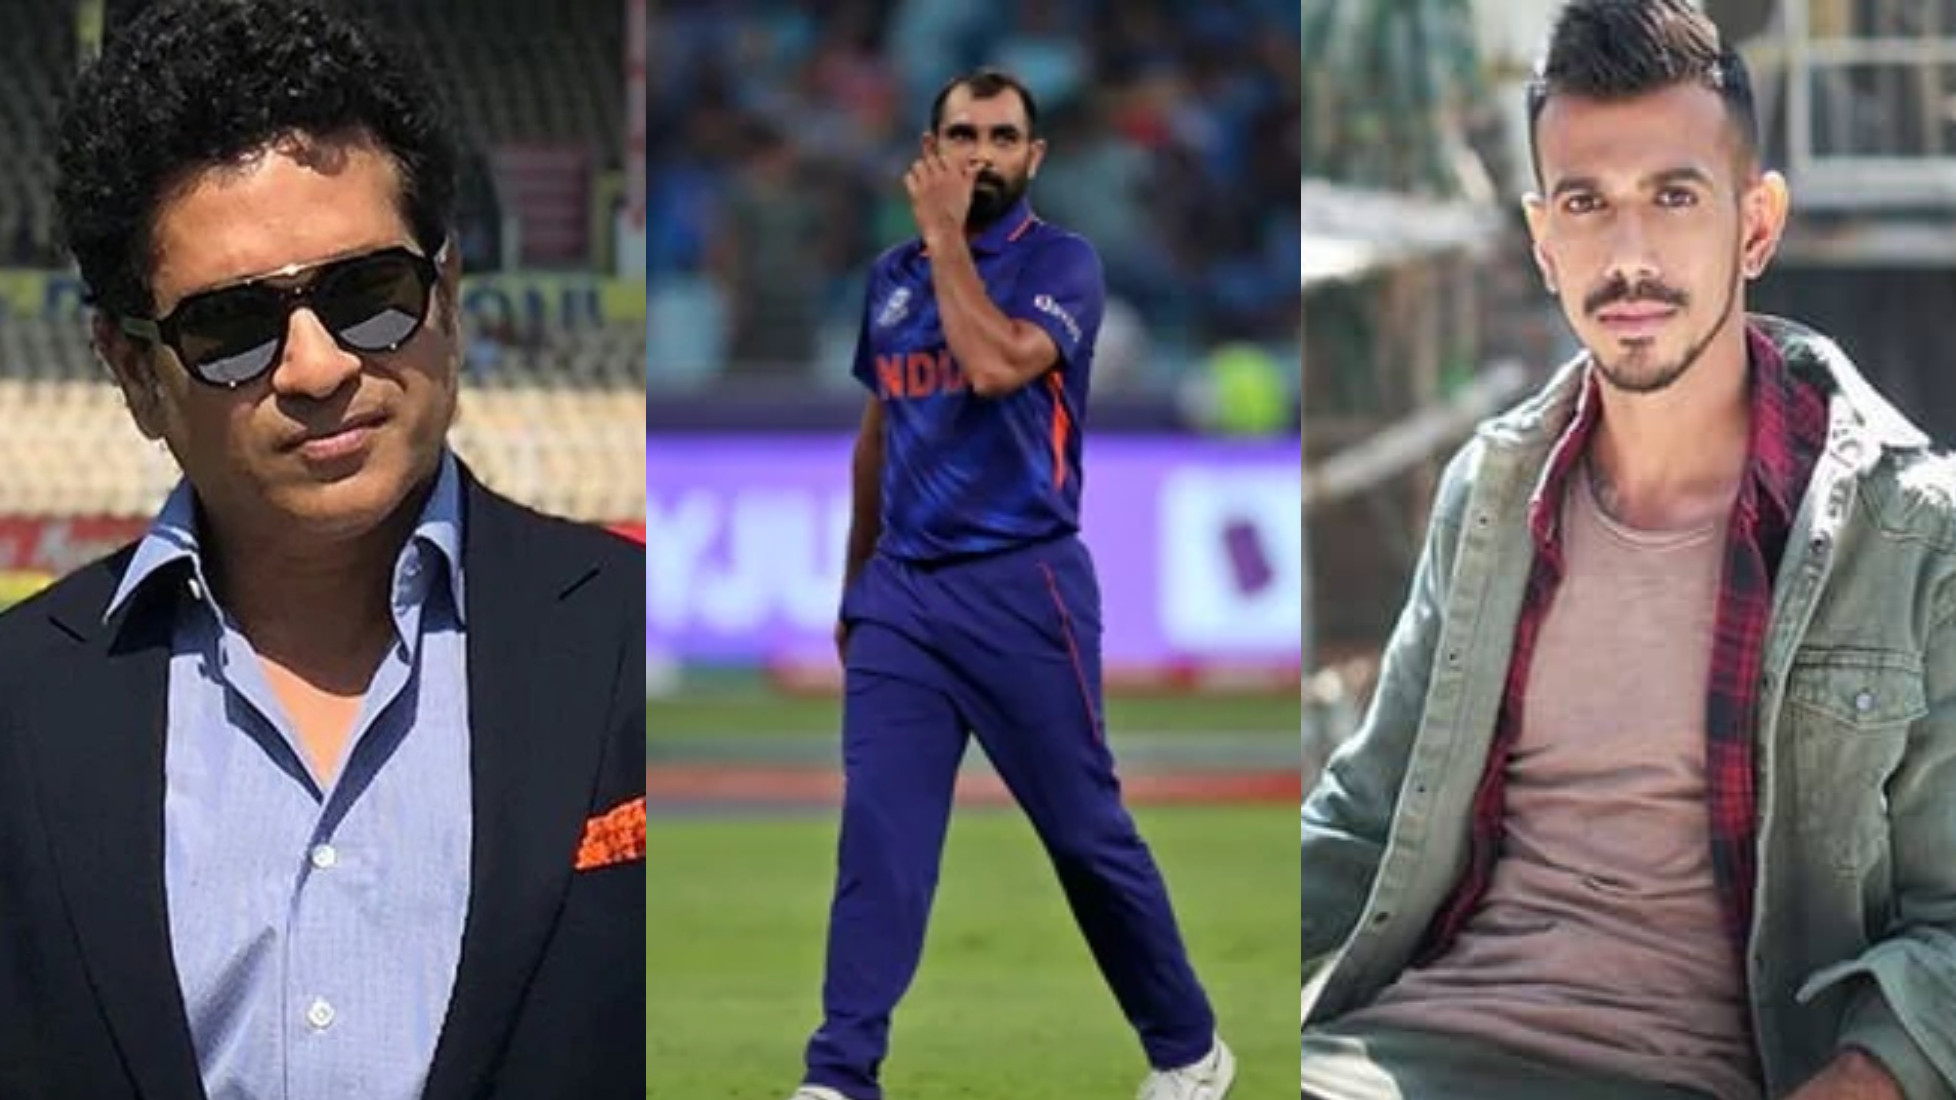 T20 World Cup 2021: Indian cricket fraternity supports Mohammad Shami after he gets abused online